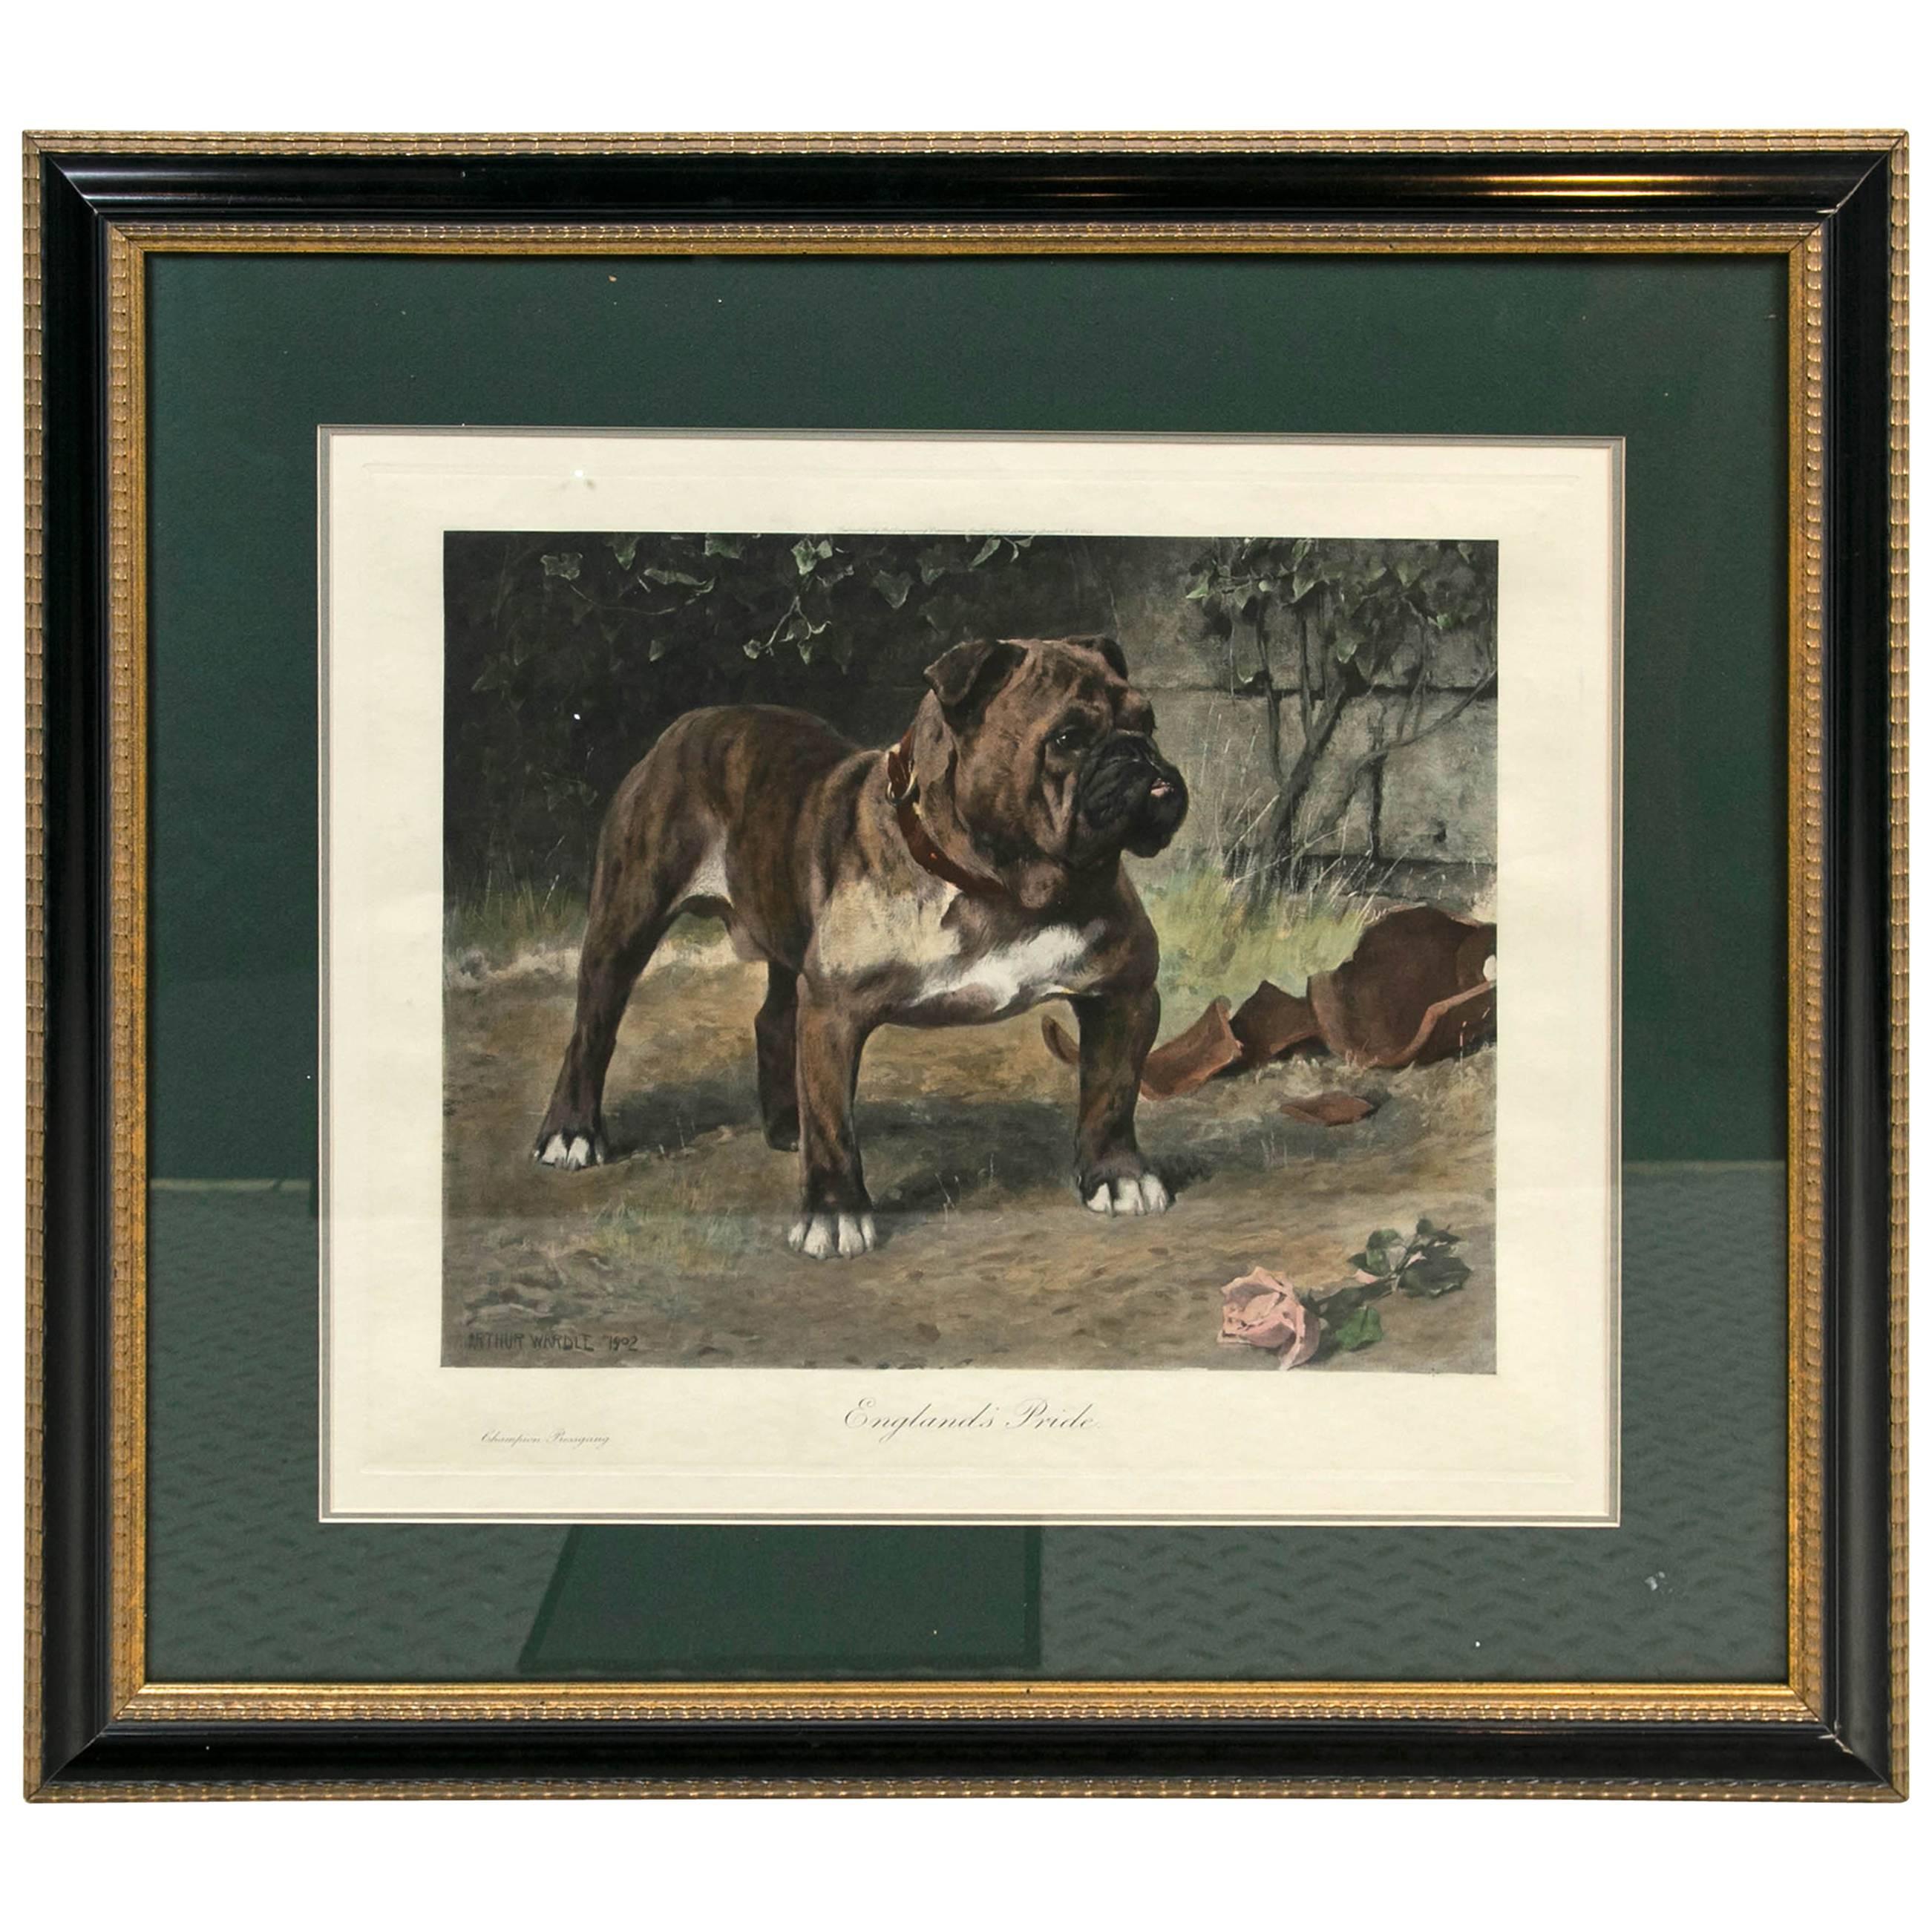 Arthur Wardle "England's Pride" Hand Colored Print For Sale